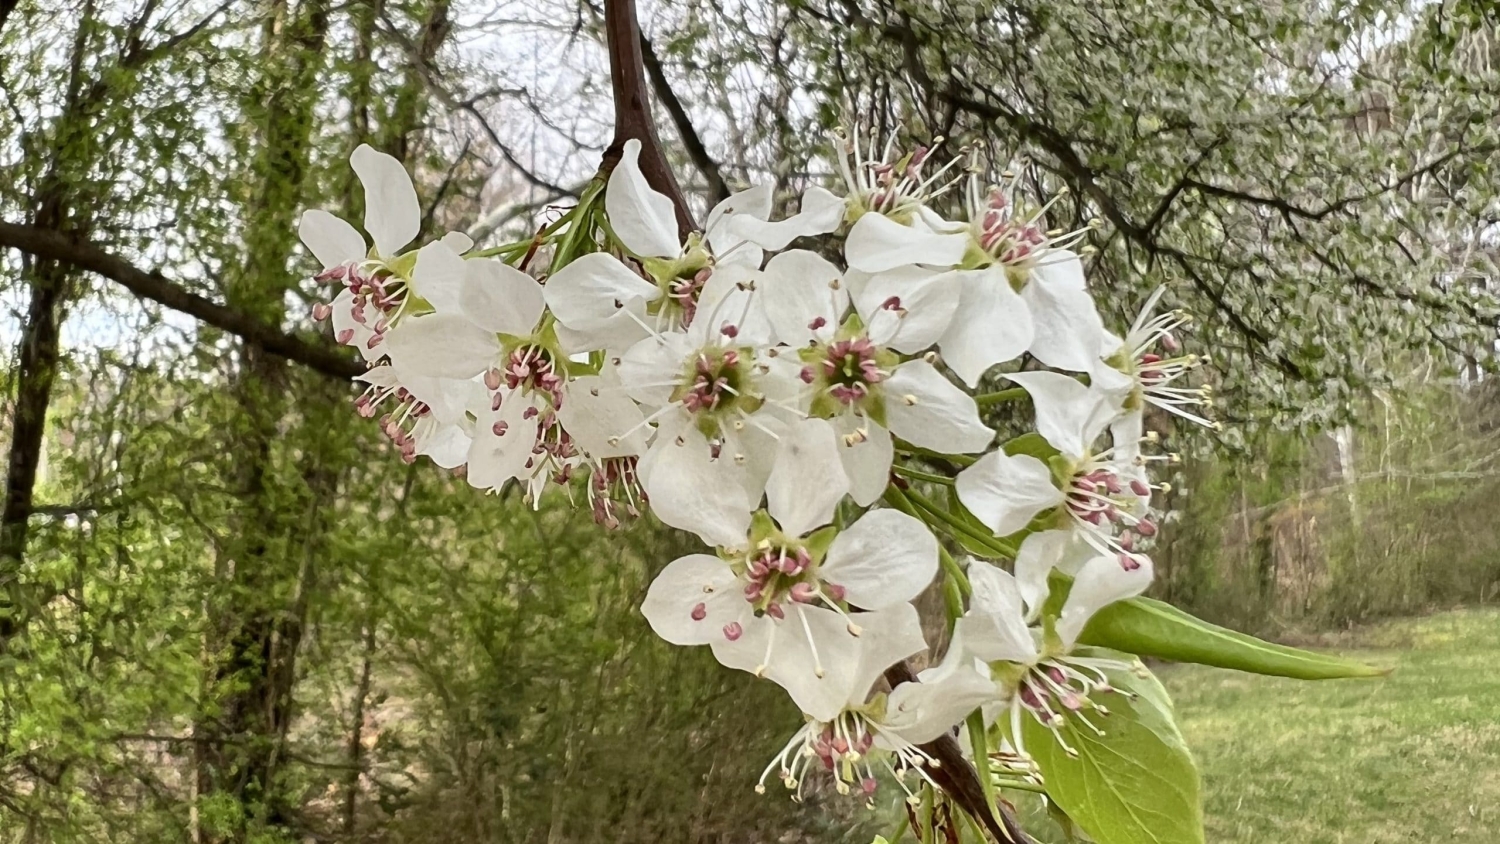 Bradford pear tree - Bounty Offered on Bradford Pear Trees - College of Natural Resources News NC State University